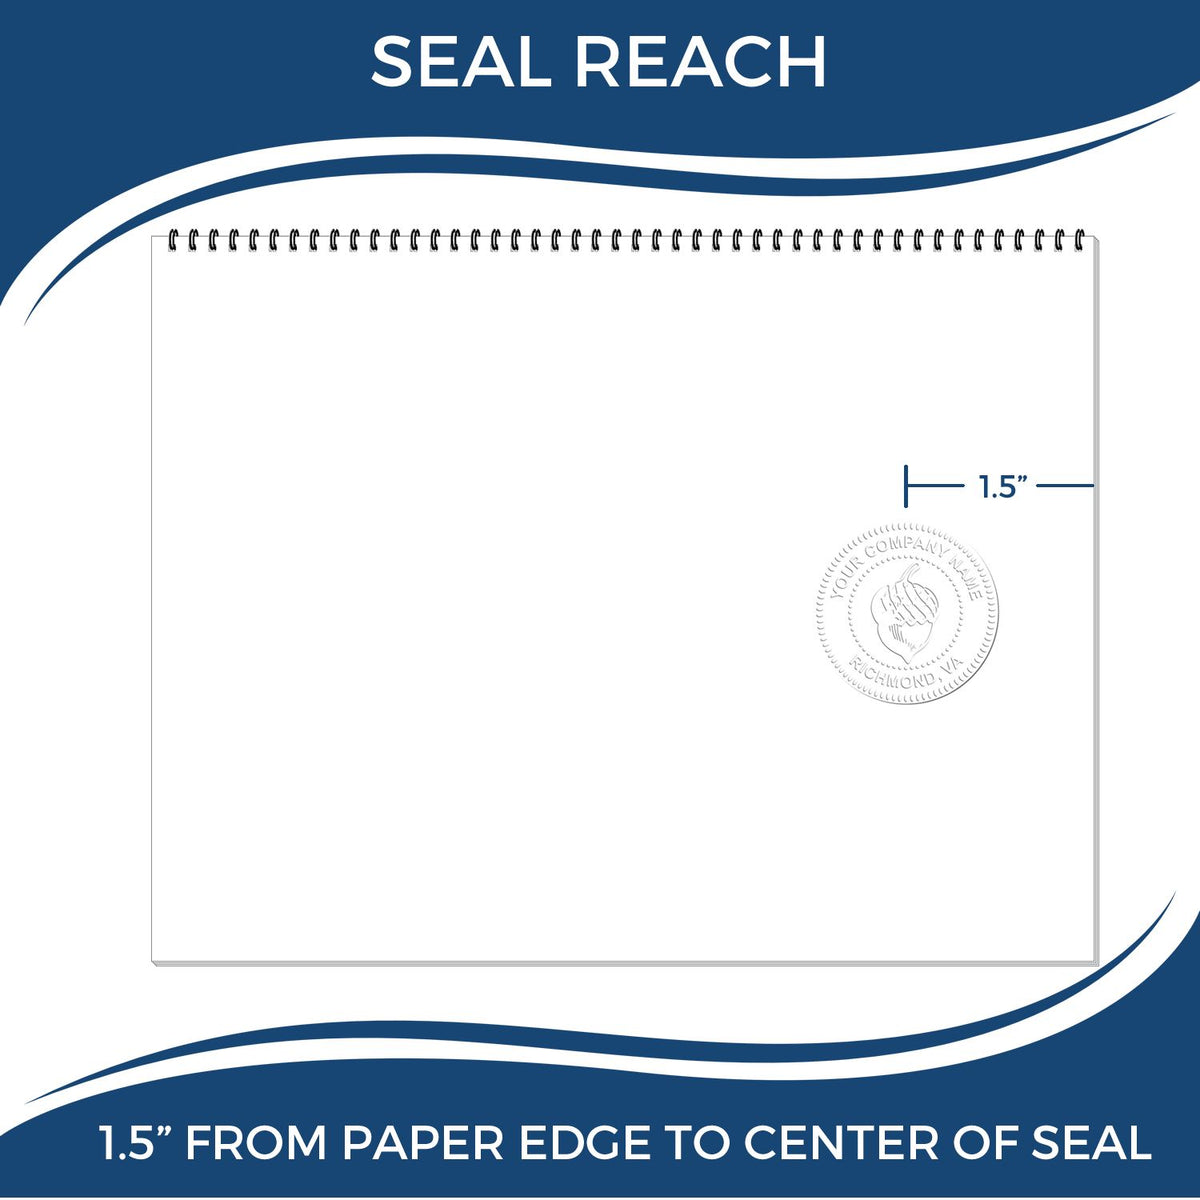 An infographic showing the seal reach which is represented by a ruler and a miniature seal image of the State of Nevada Architectural Seal Embosser